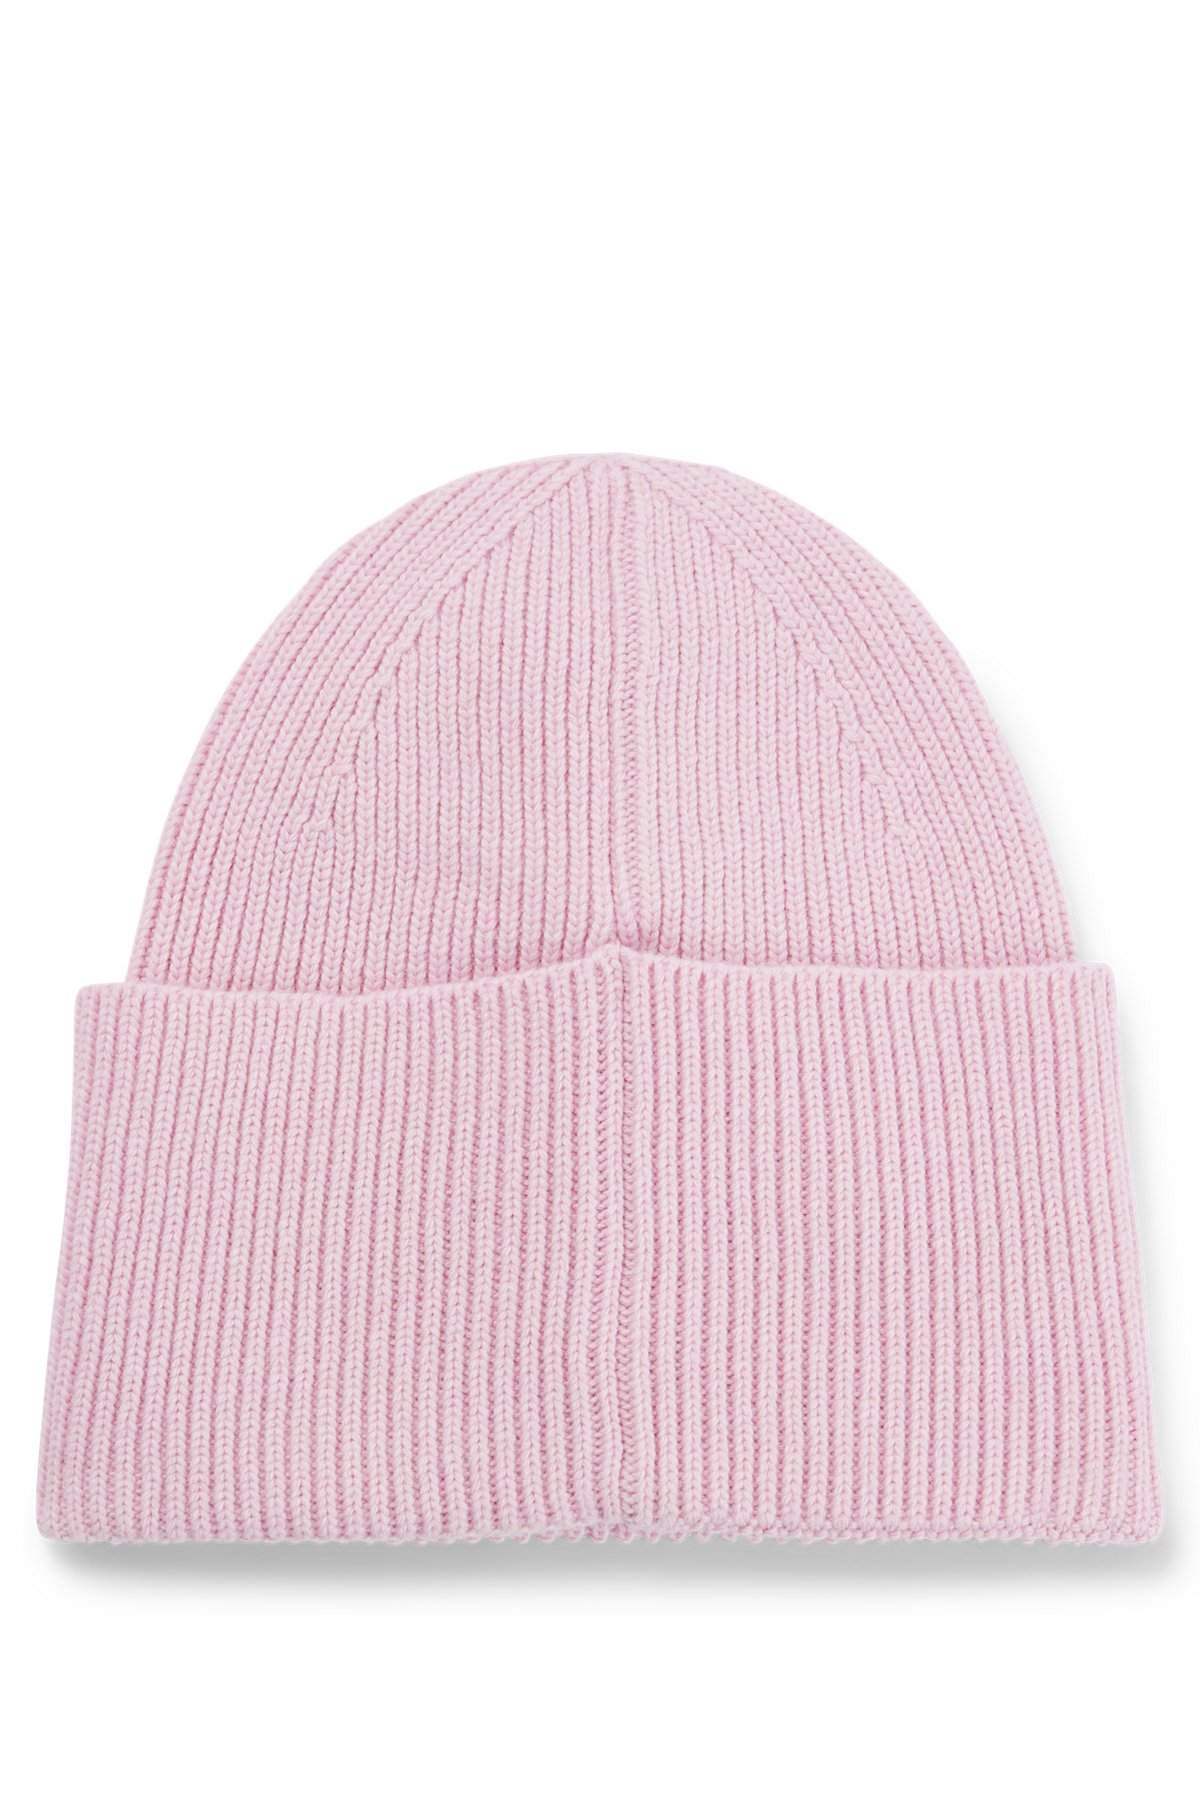 Wool-blend beanie hat with red logo label, light pink